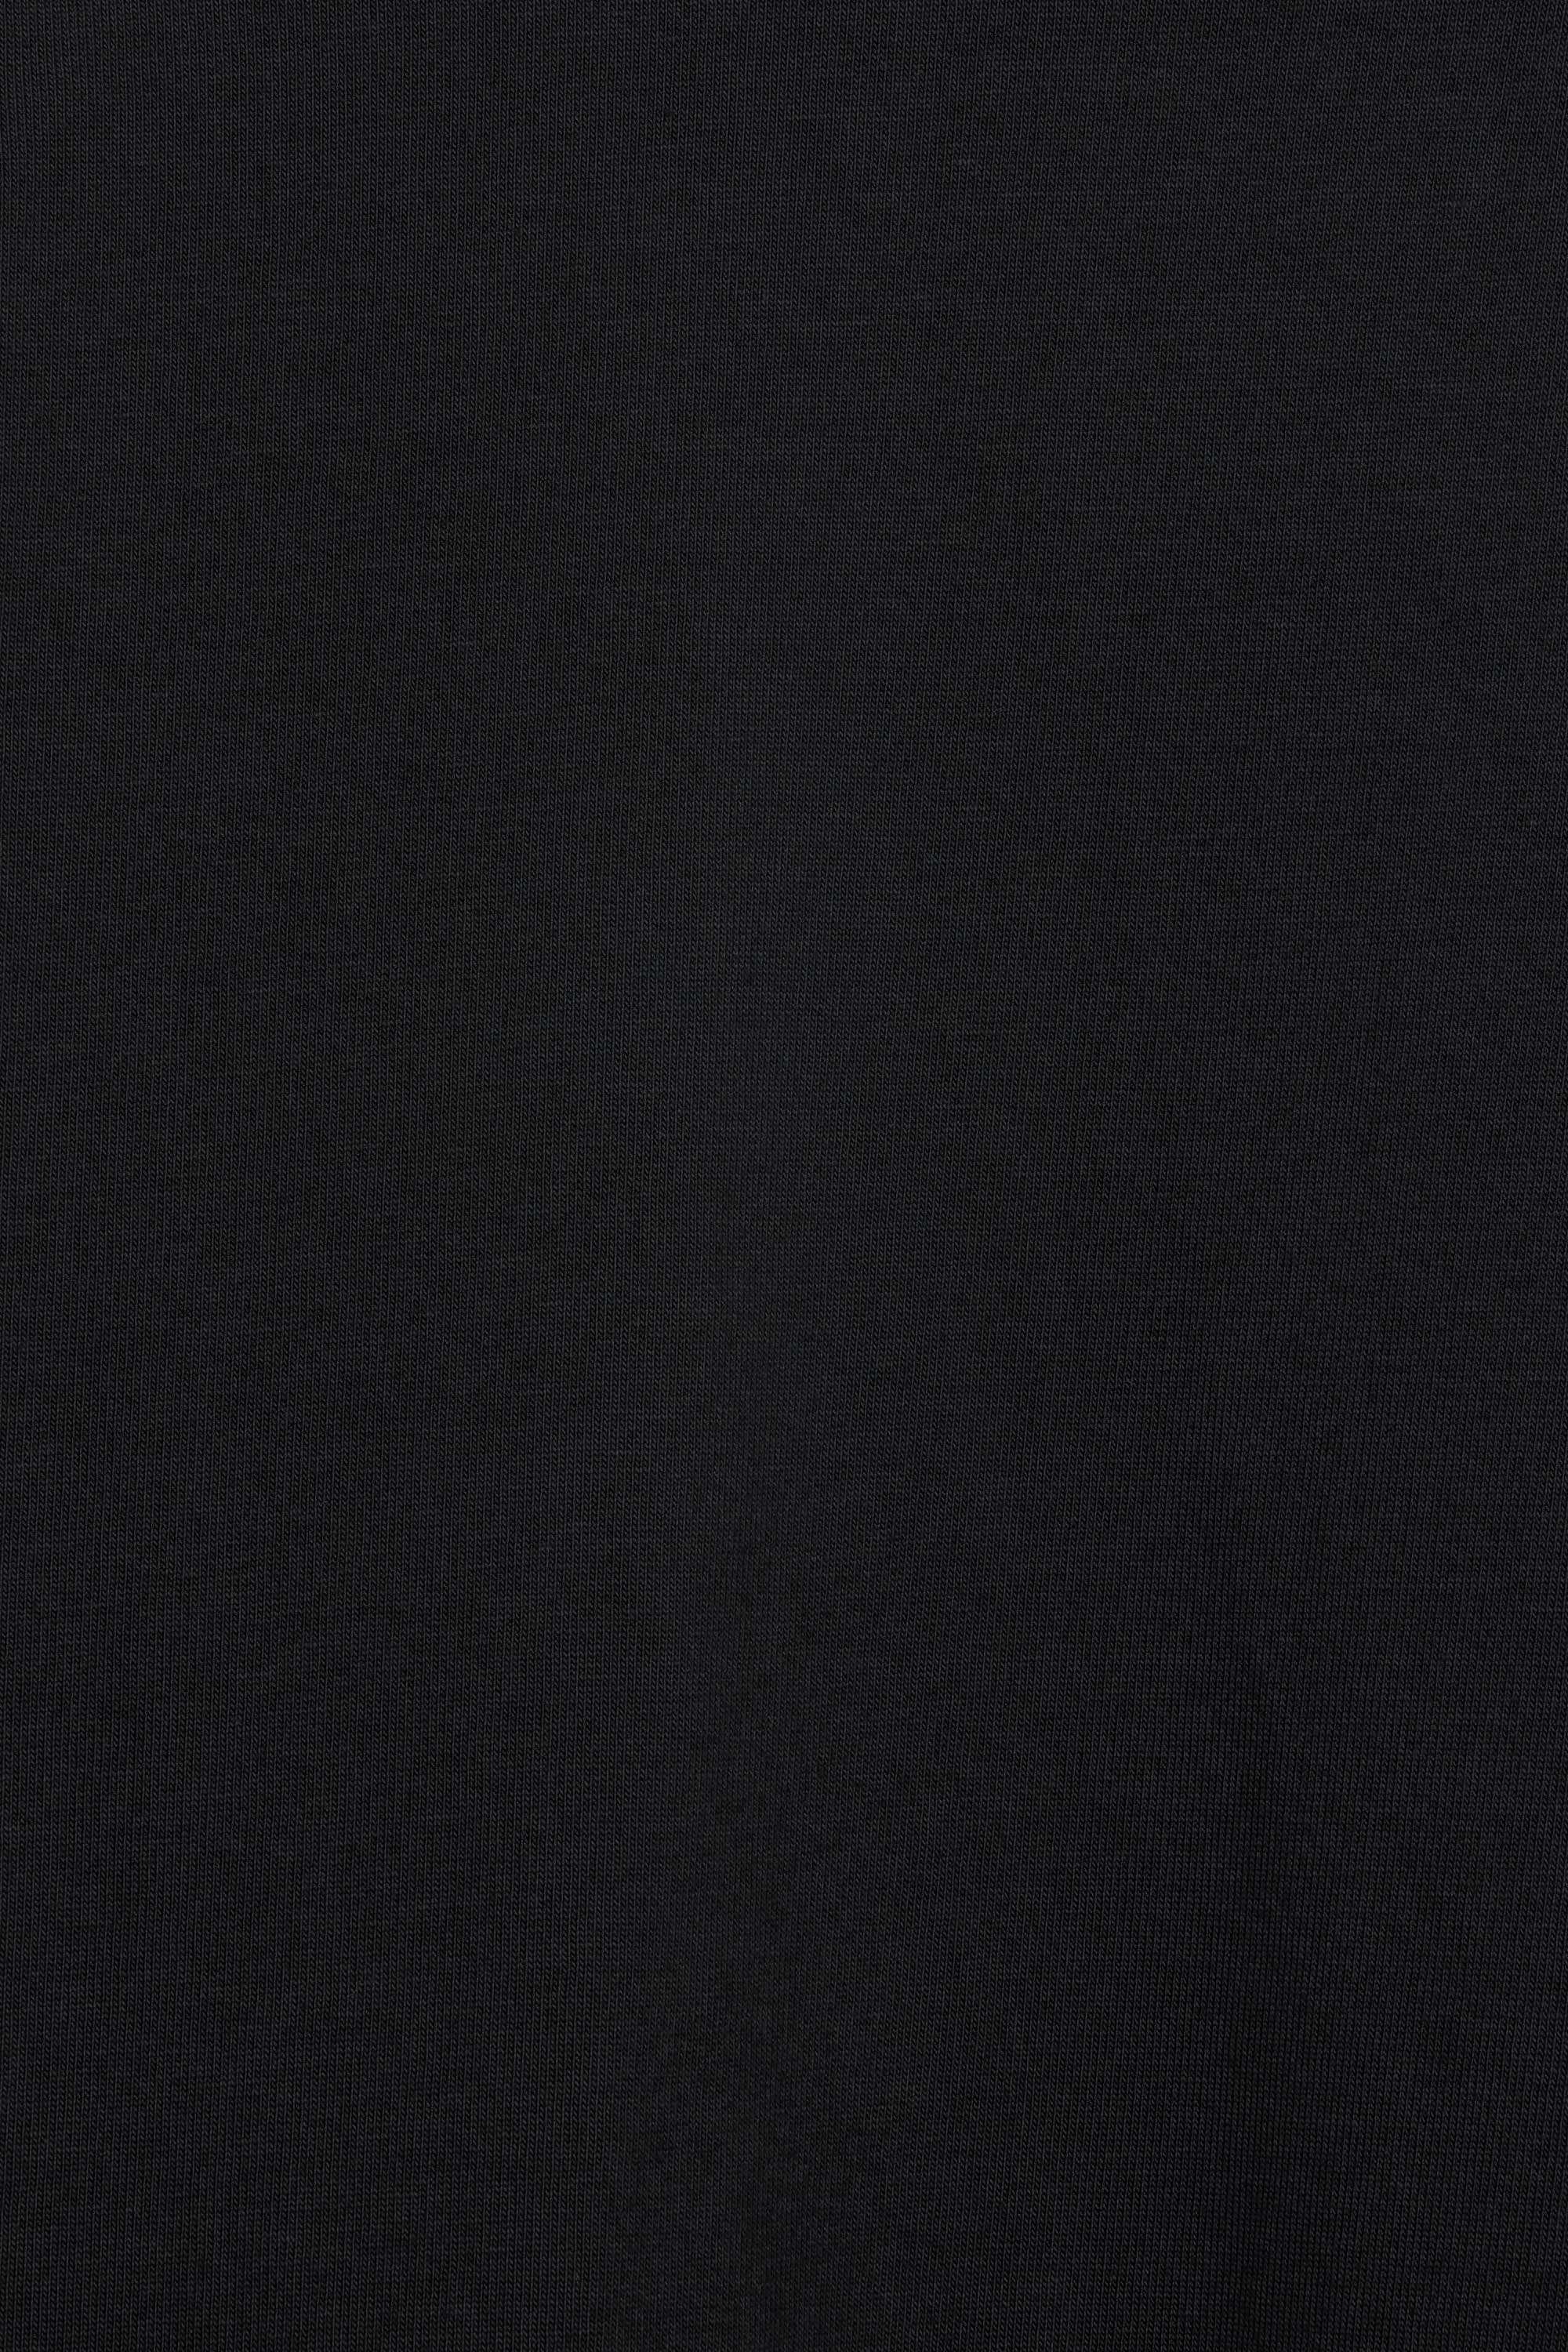 20//1 RECYCLE SUVIN ORGANIC COTTON KNIT BASE BALL TEE L/S, Black